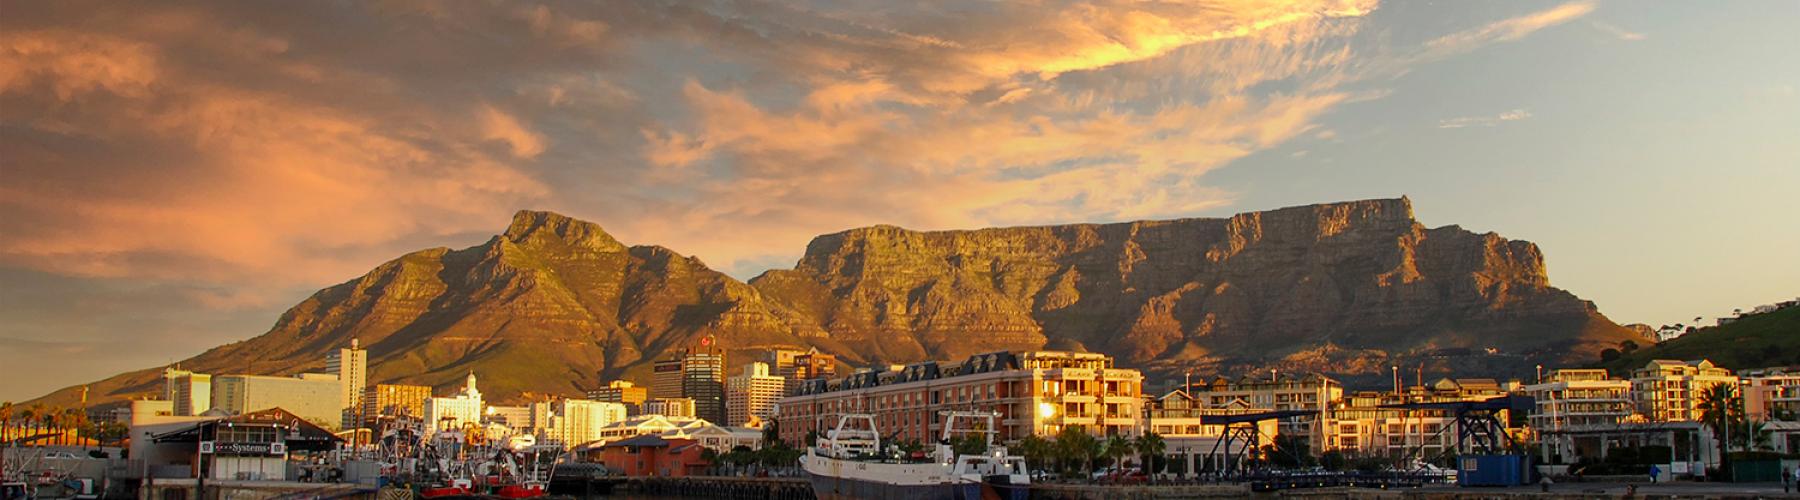 Location cape town header image